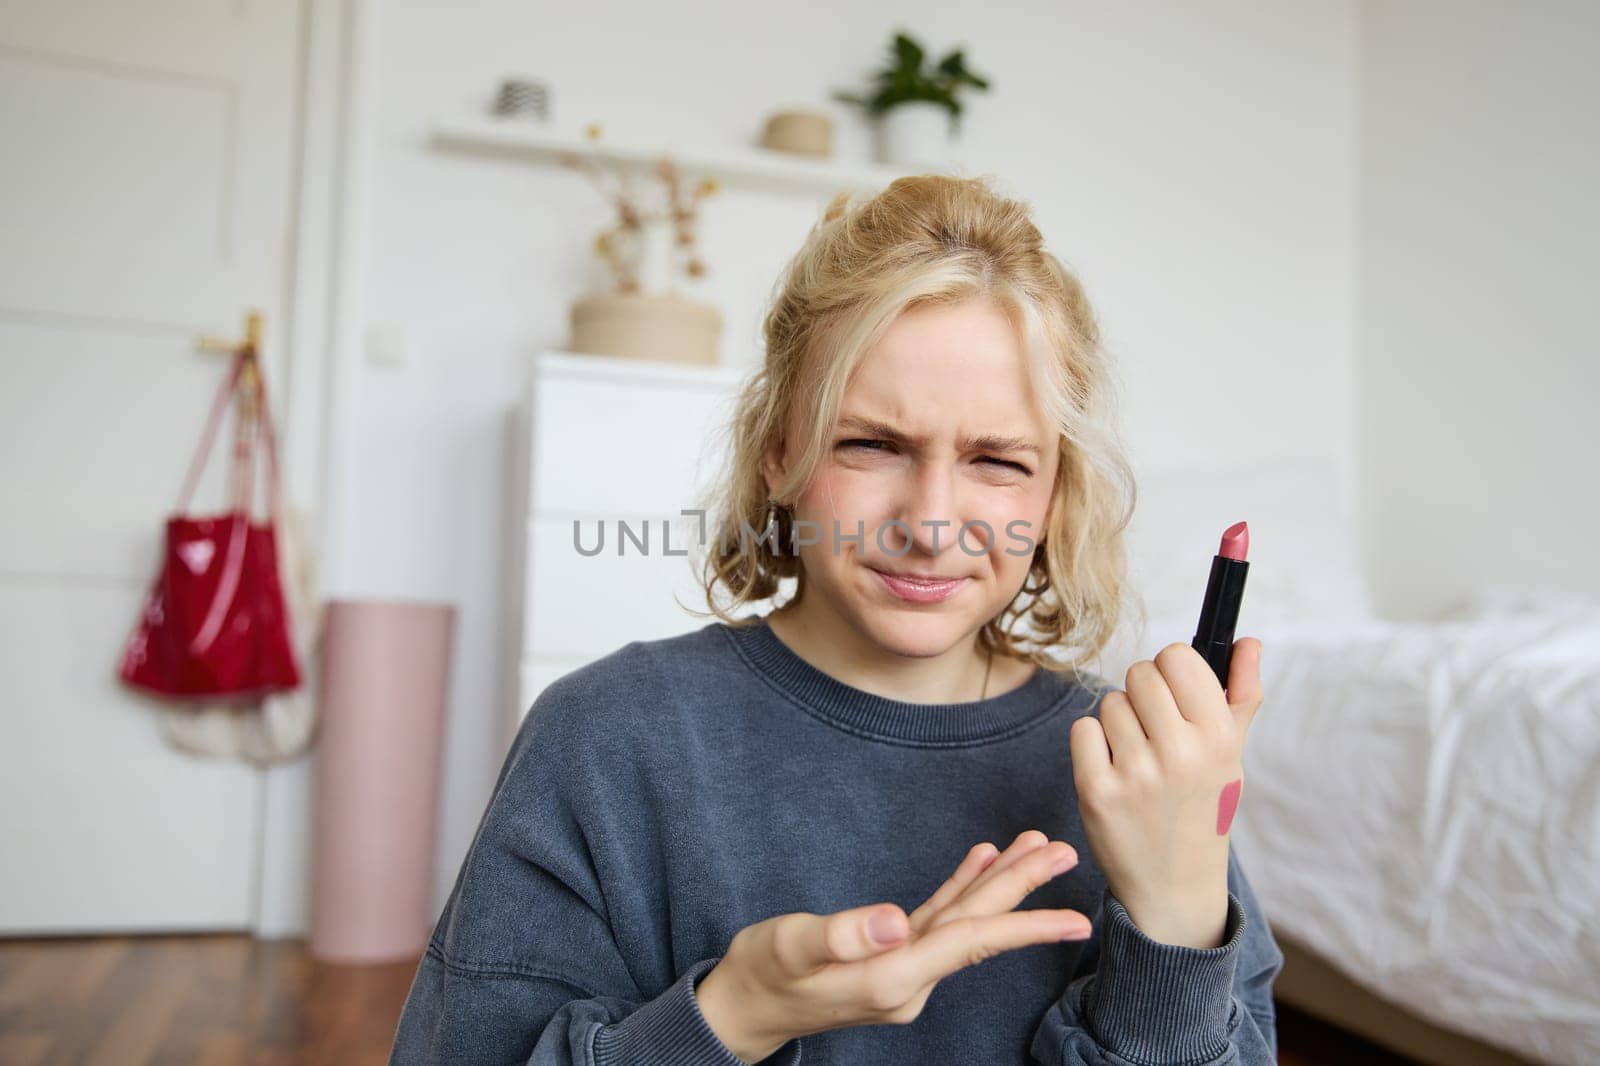 Portrait of young blogger, woman recording video about beauty, makeup products, showing lipstick and grimacing, express negative opinion, creating a lifestyle vlog content.